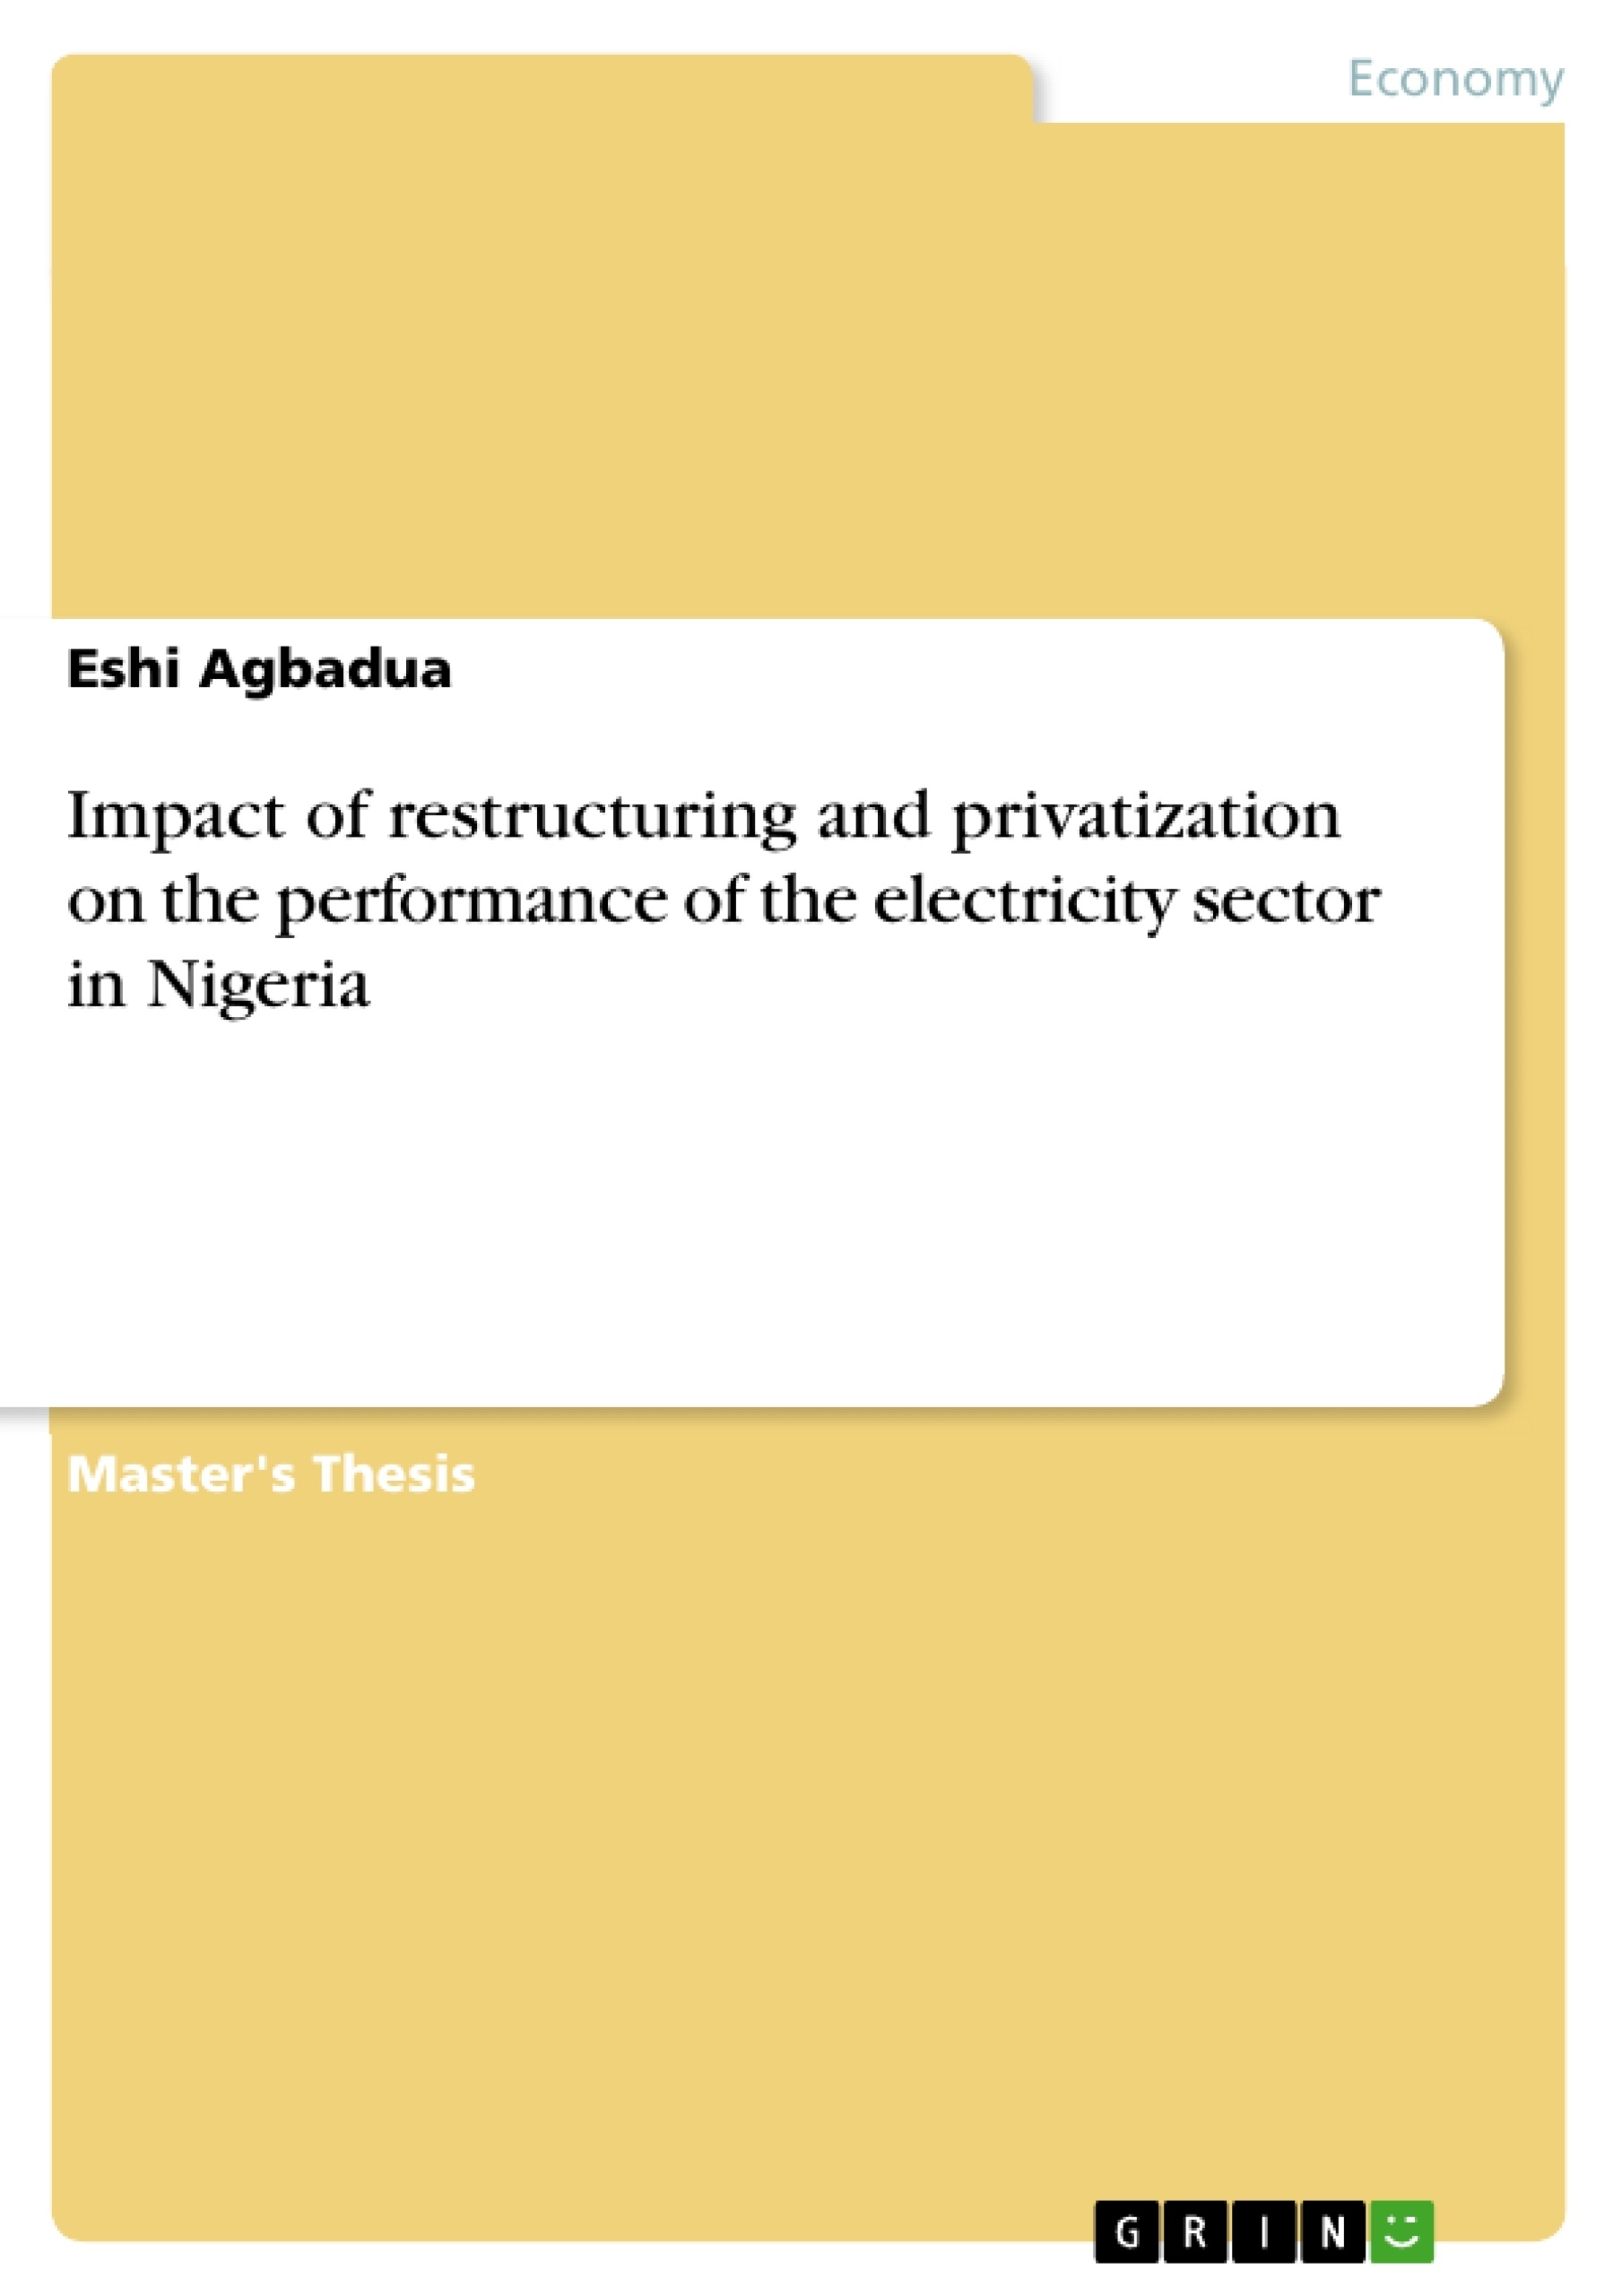 Título: Impact of restructuring and privatization on the performance of the electricity sector in Nigeria